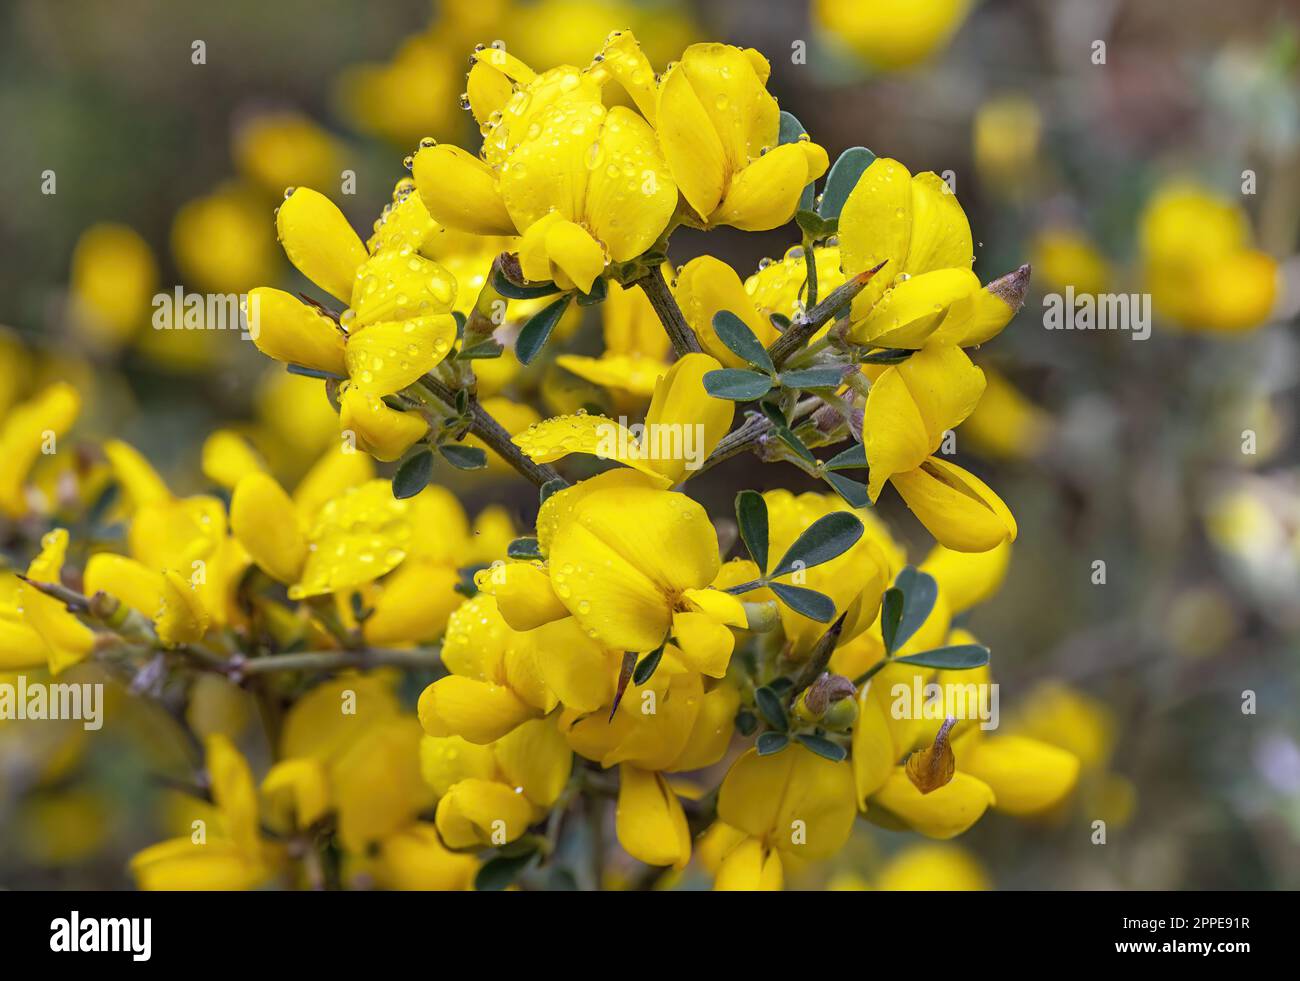 beautiful shrub with yellow flowers (Calicotome villosa) in Israel Stock Photo